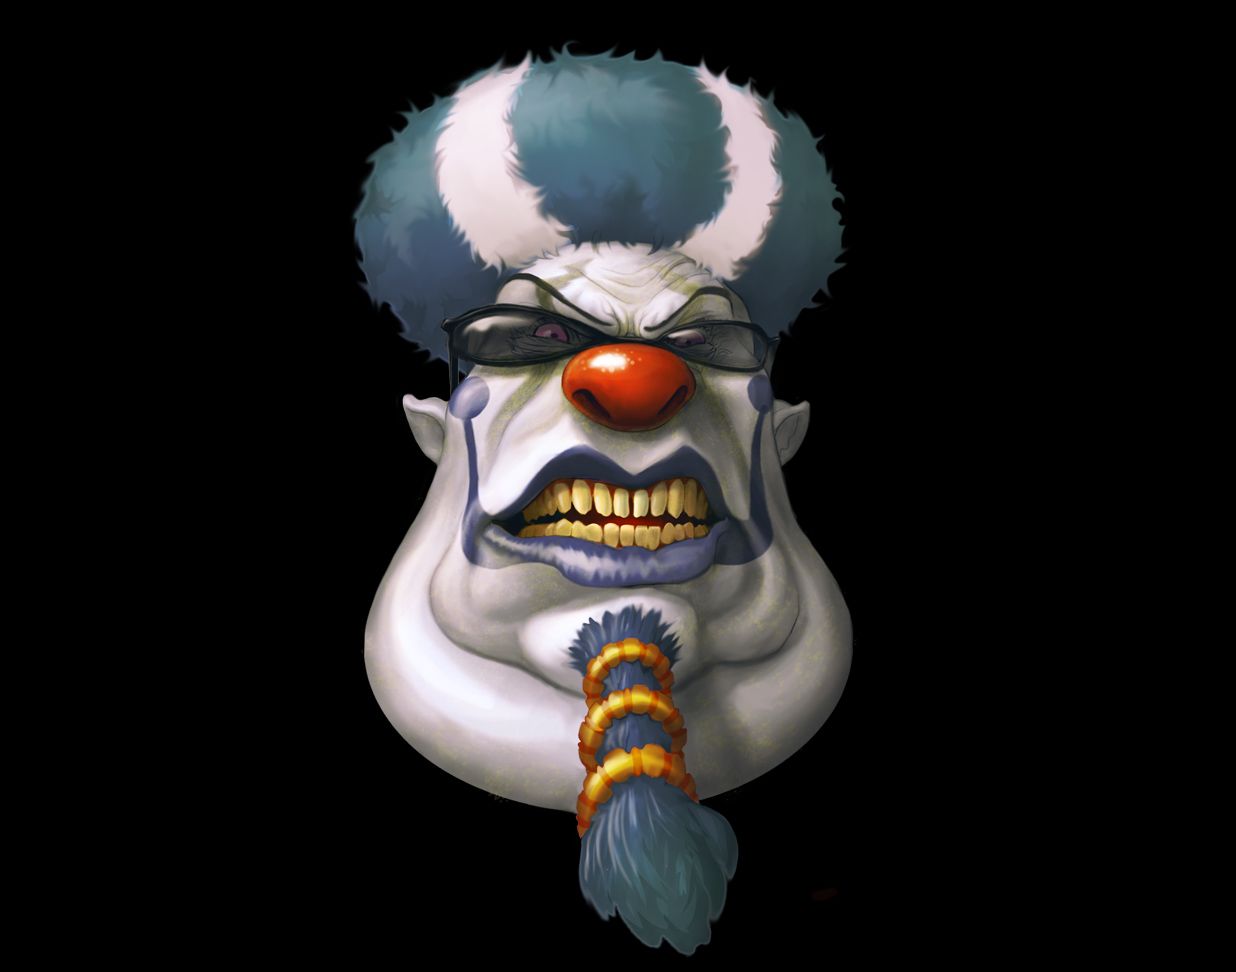 A white clown with a blue and white hairdo, a red nose, and yellow teeth - Clown